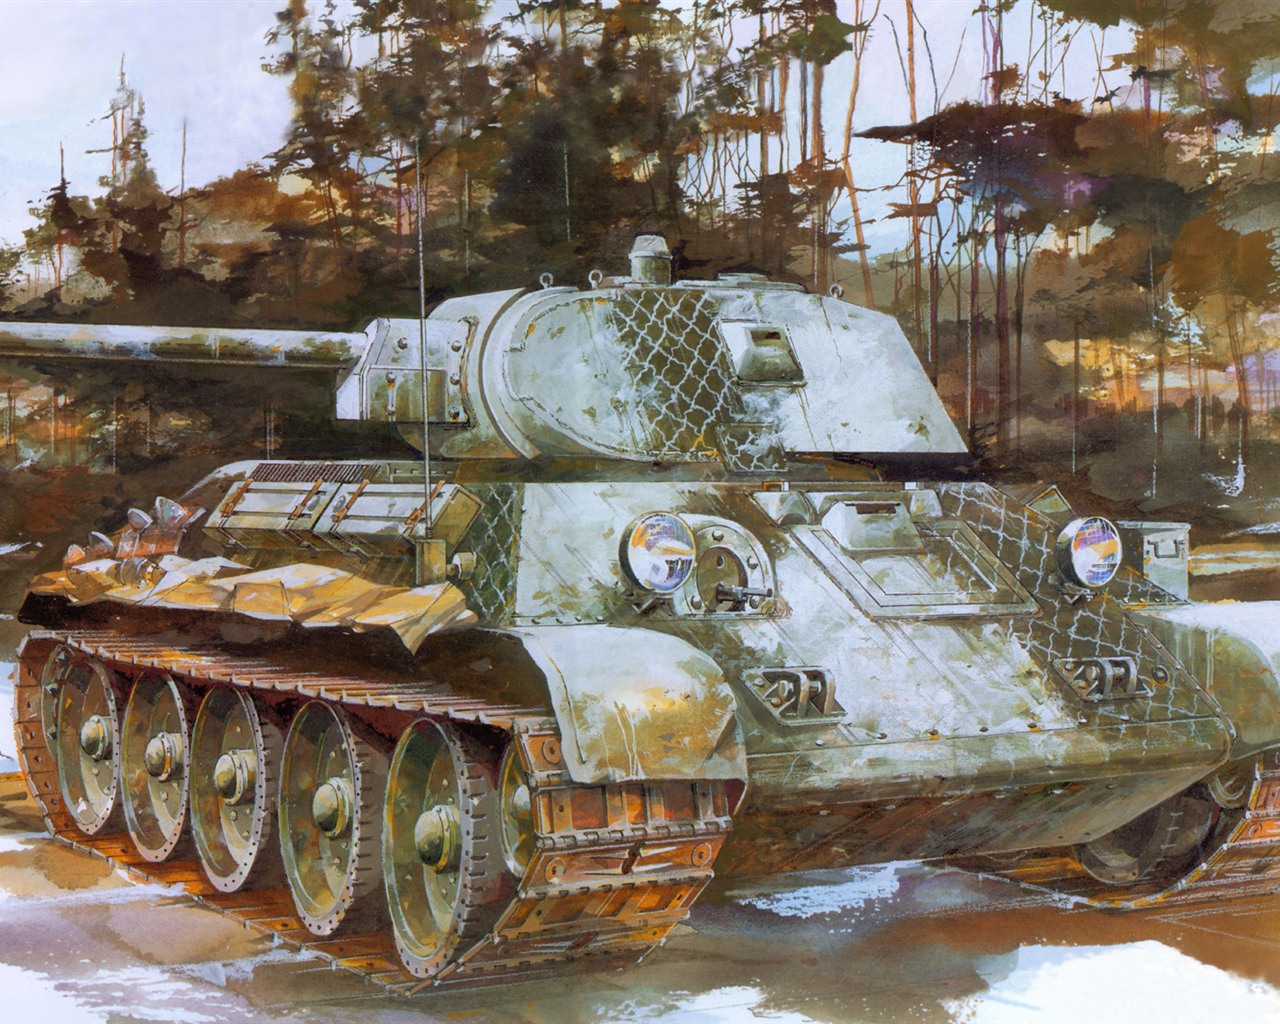 Military tanks, armored HD painting wallpapers #8 - 1280x1024